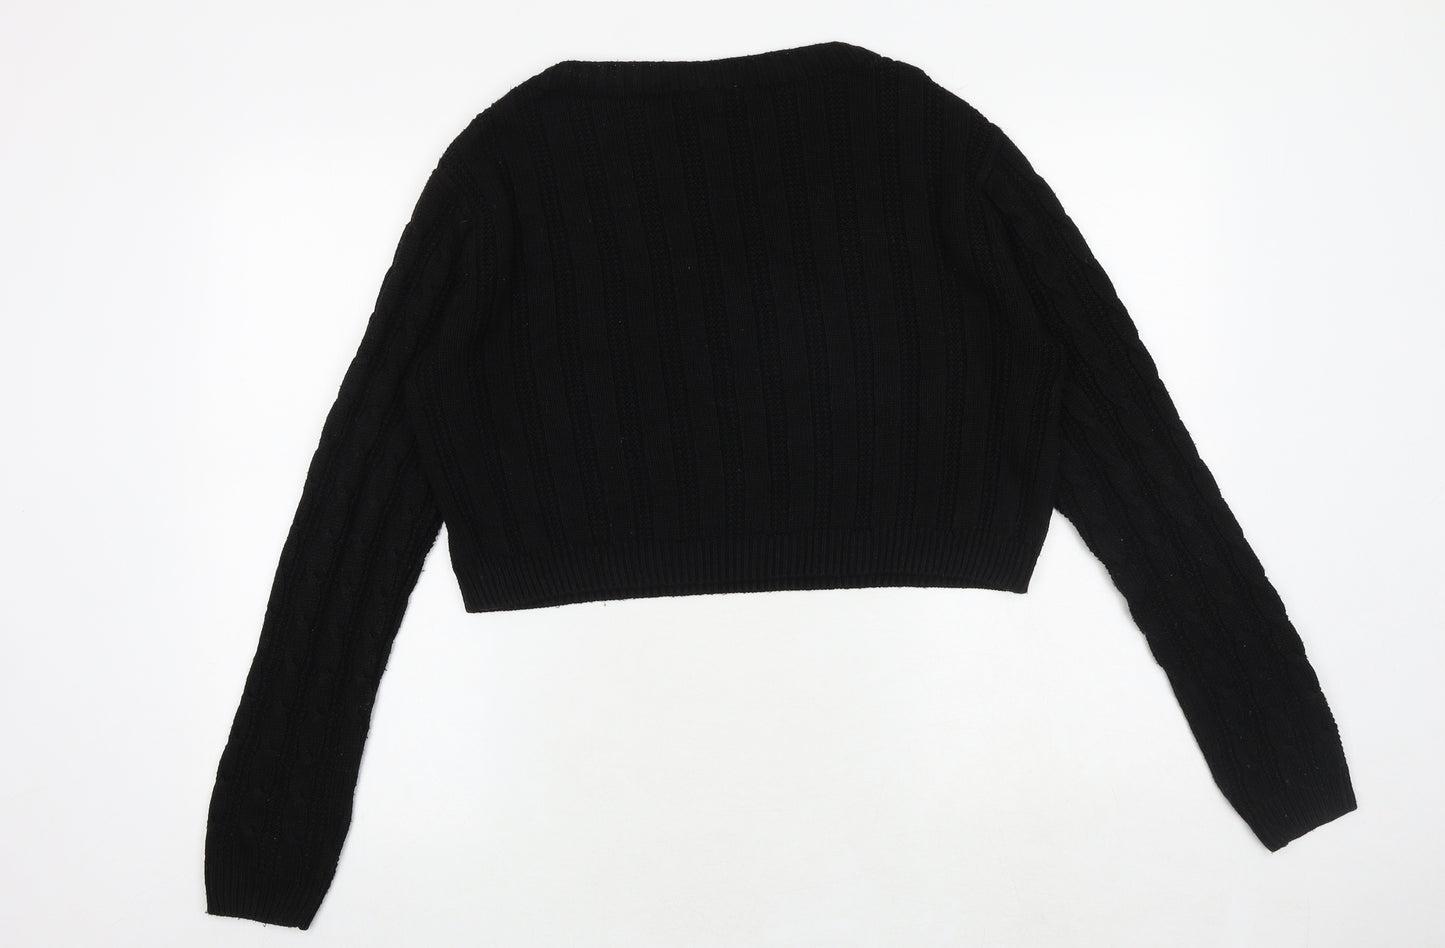 Topshop Womens Black Boat Neck Polyester Pullover Jumper Size S